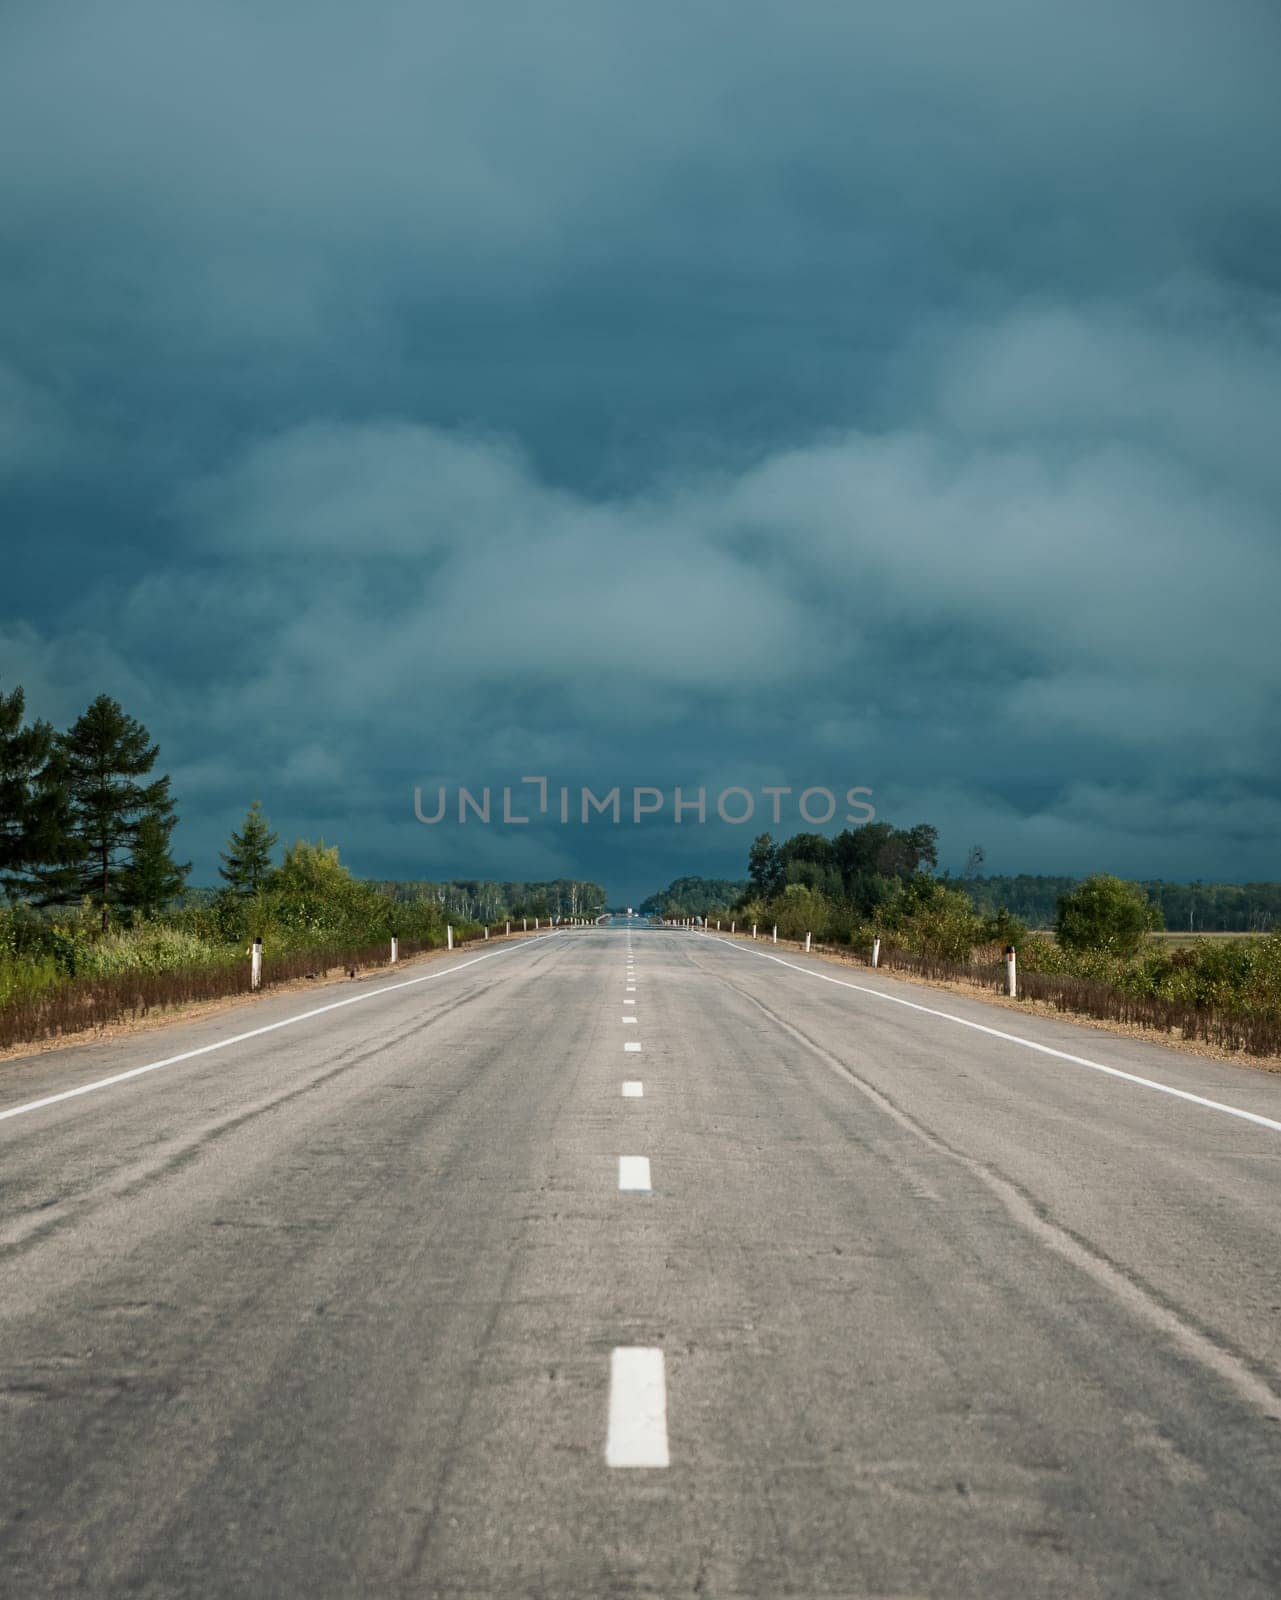 Straight empty highway stretching toward distant forest on a cloudy day by Busker